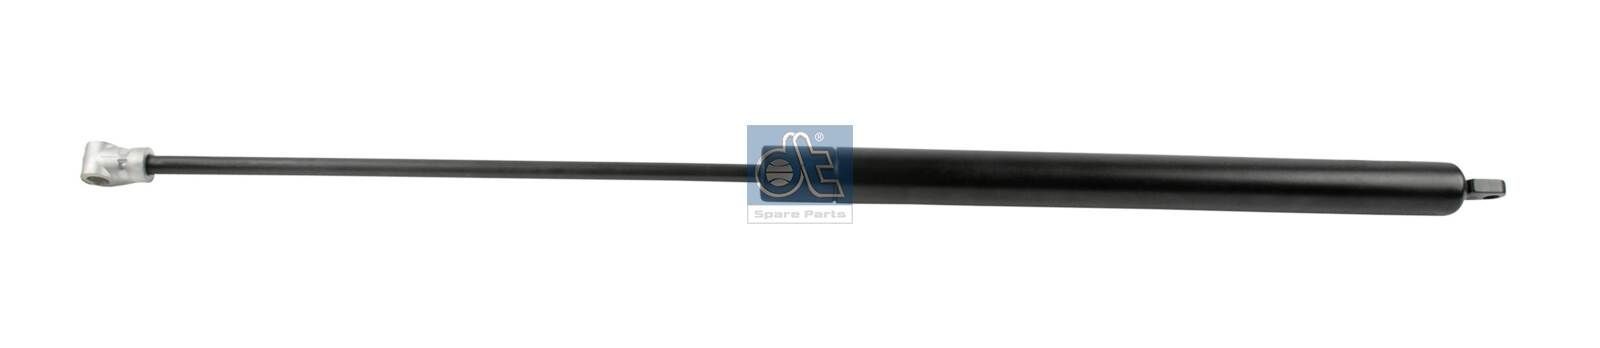 7.71200 DT Spare Parts Tailgate struts VOLVO 710N, 700 mm